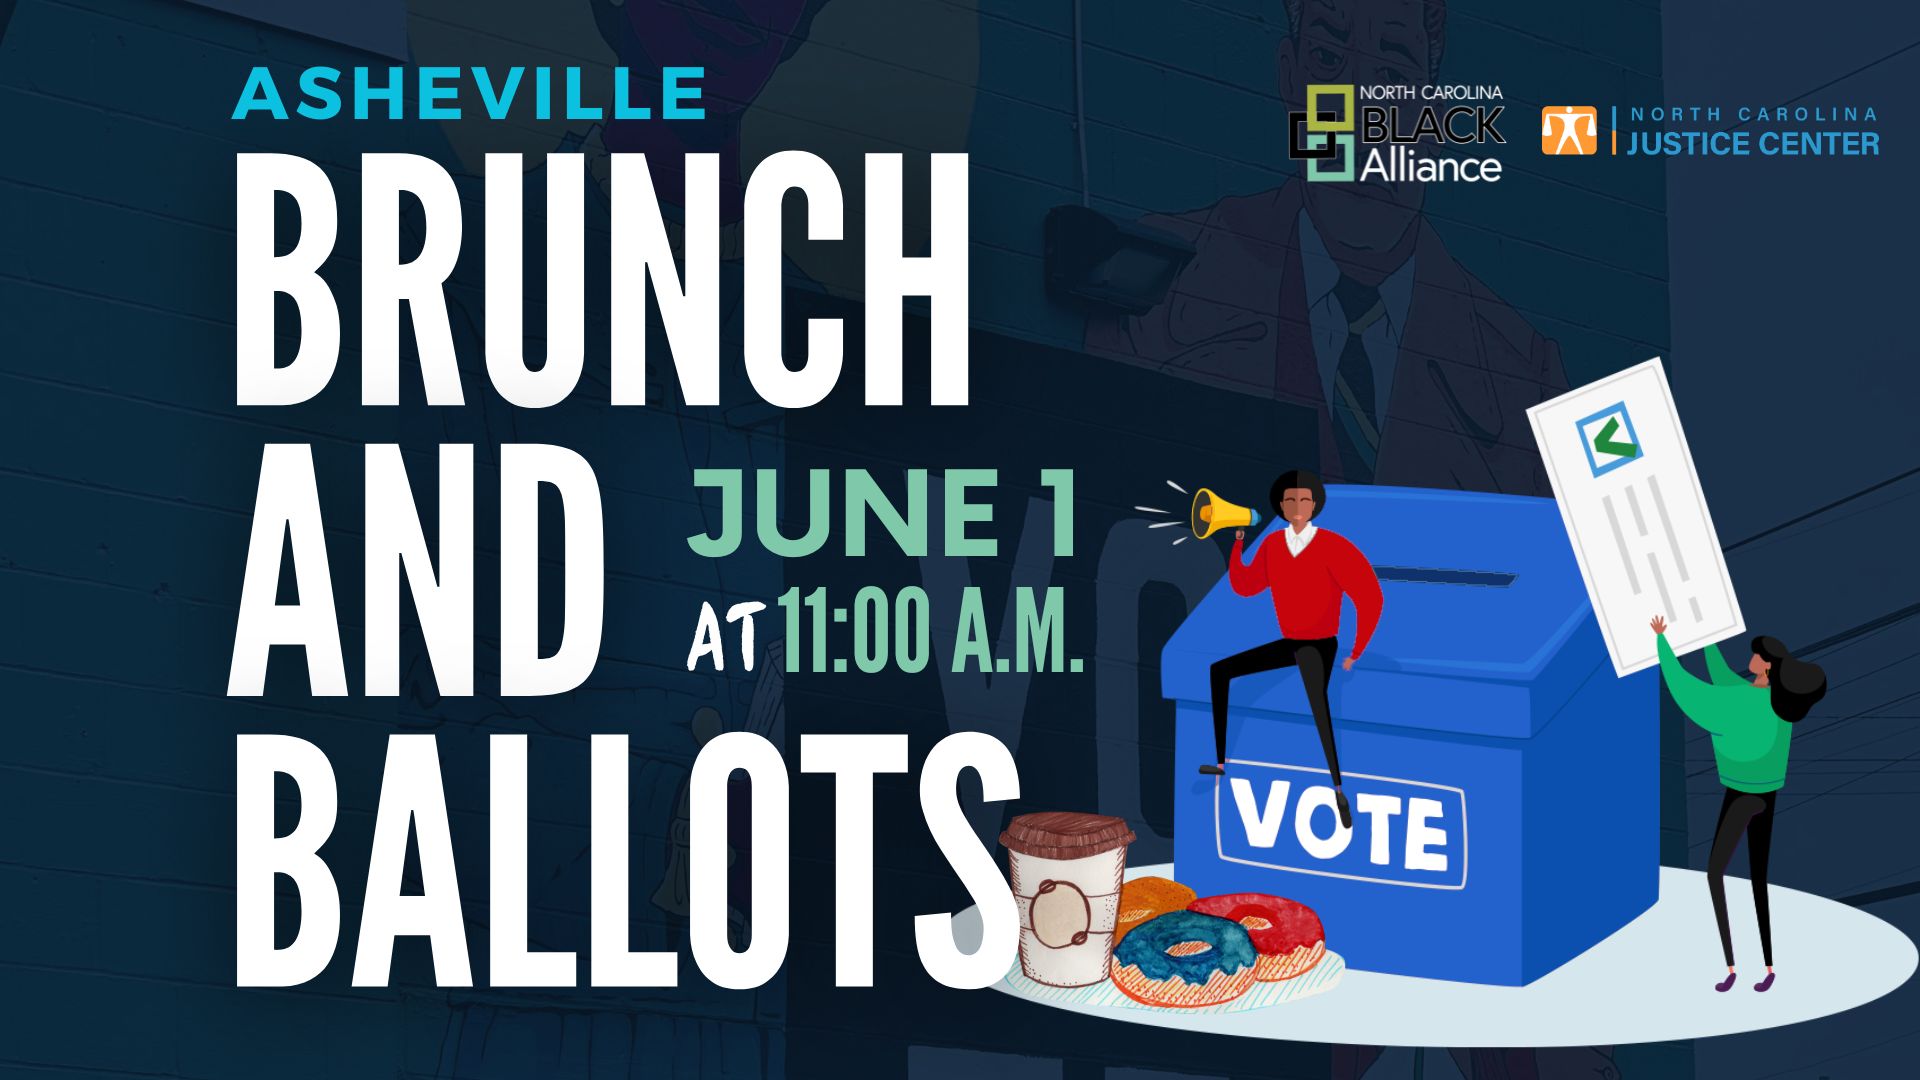 Brunch and Ballots Asheville on June 1 at 11 am